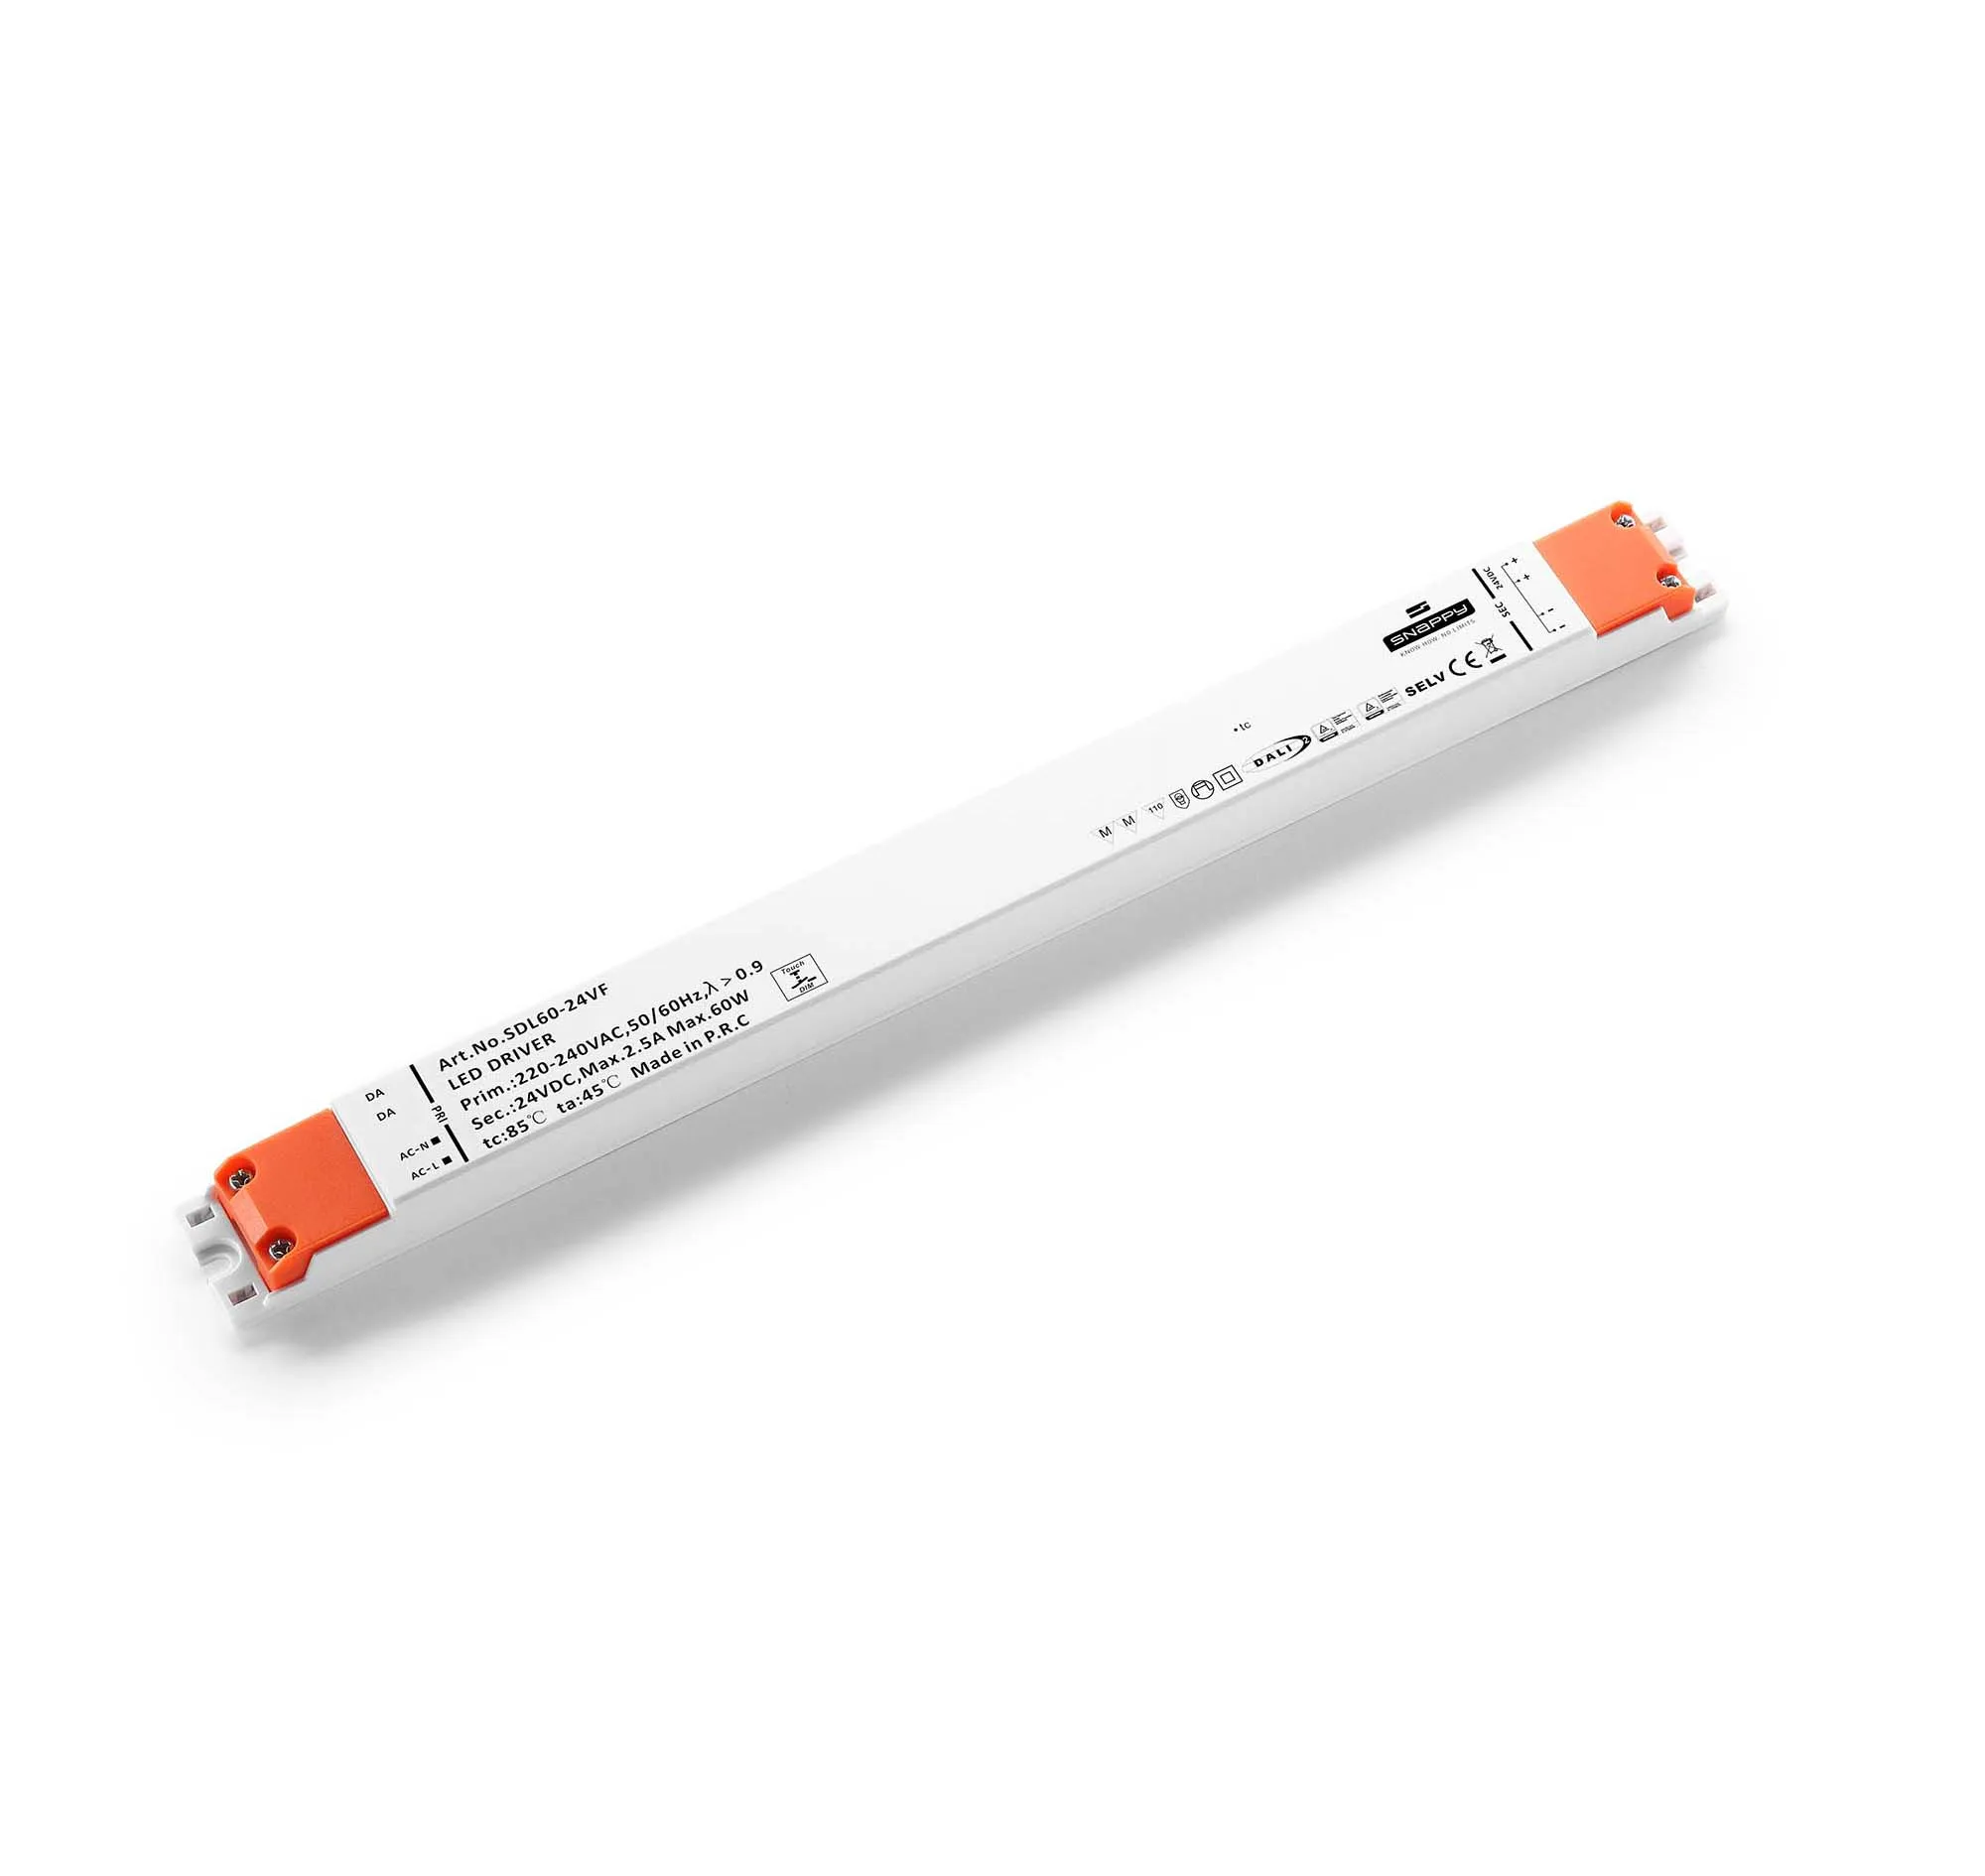 SDL60-24VF DALI 2 .0 linear constant voltage output 24V dimmable LED driver